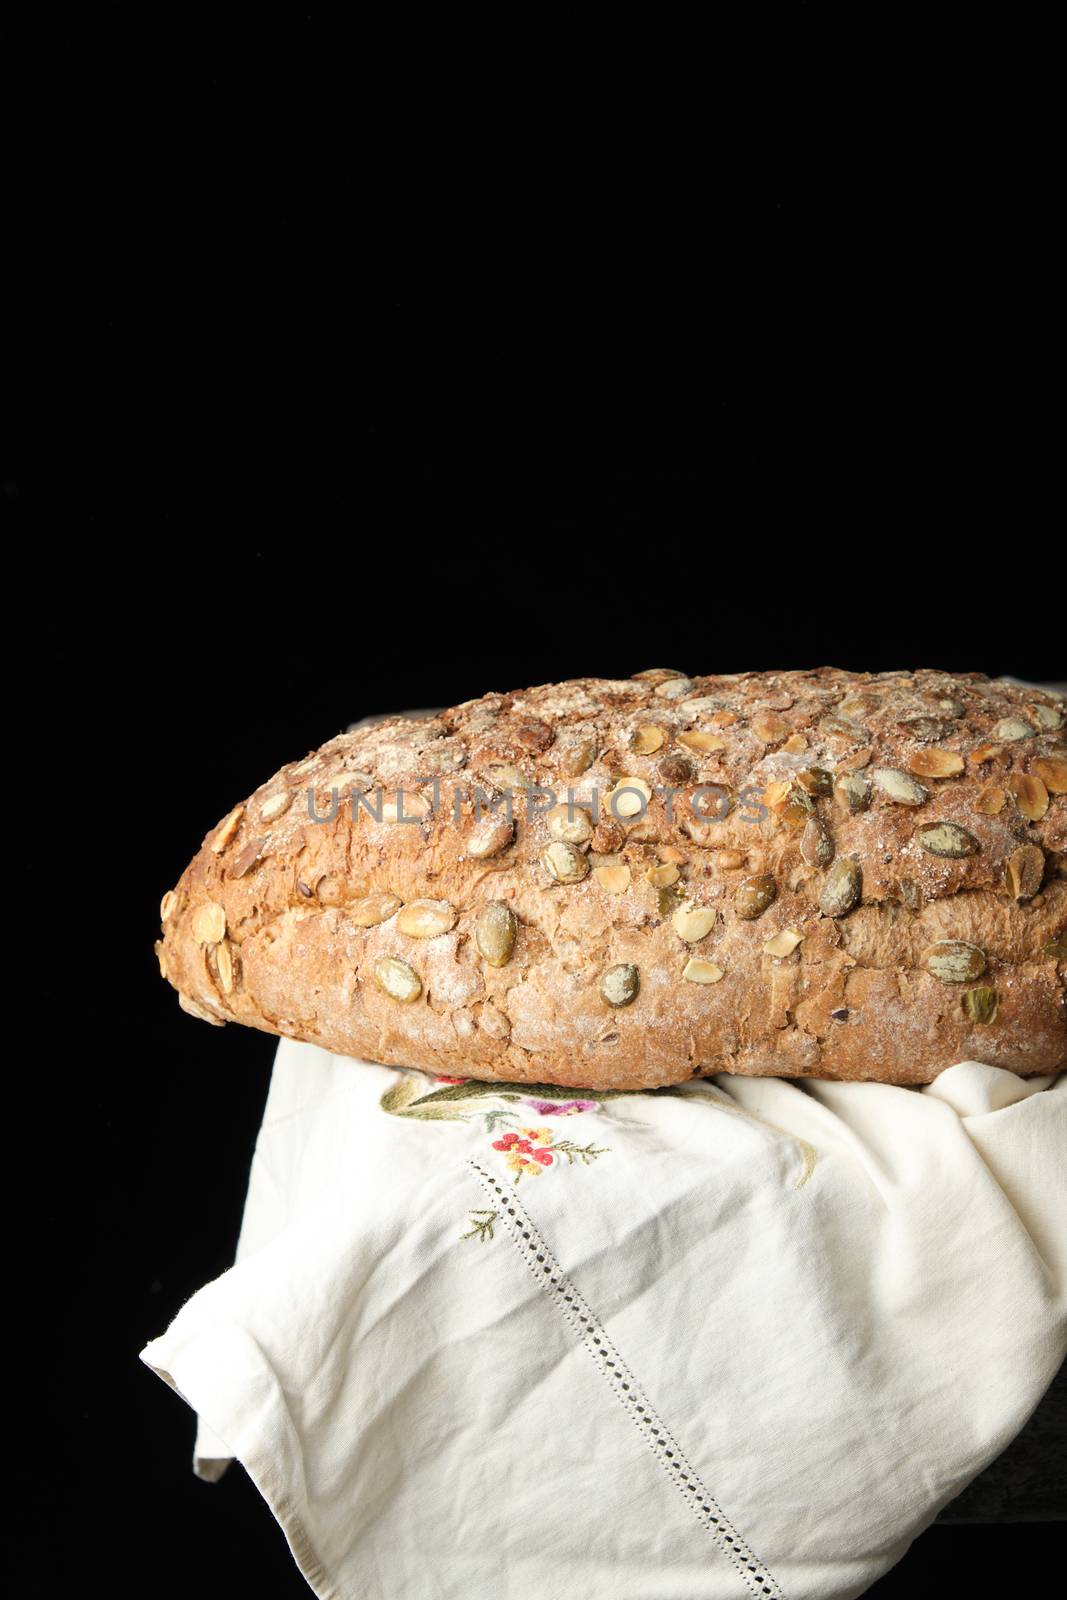 baked oval bread made from rye flour with pumpkin seeds by ndanko